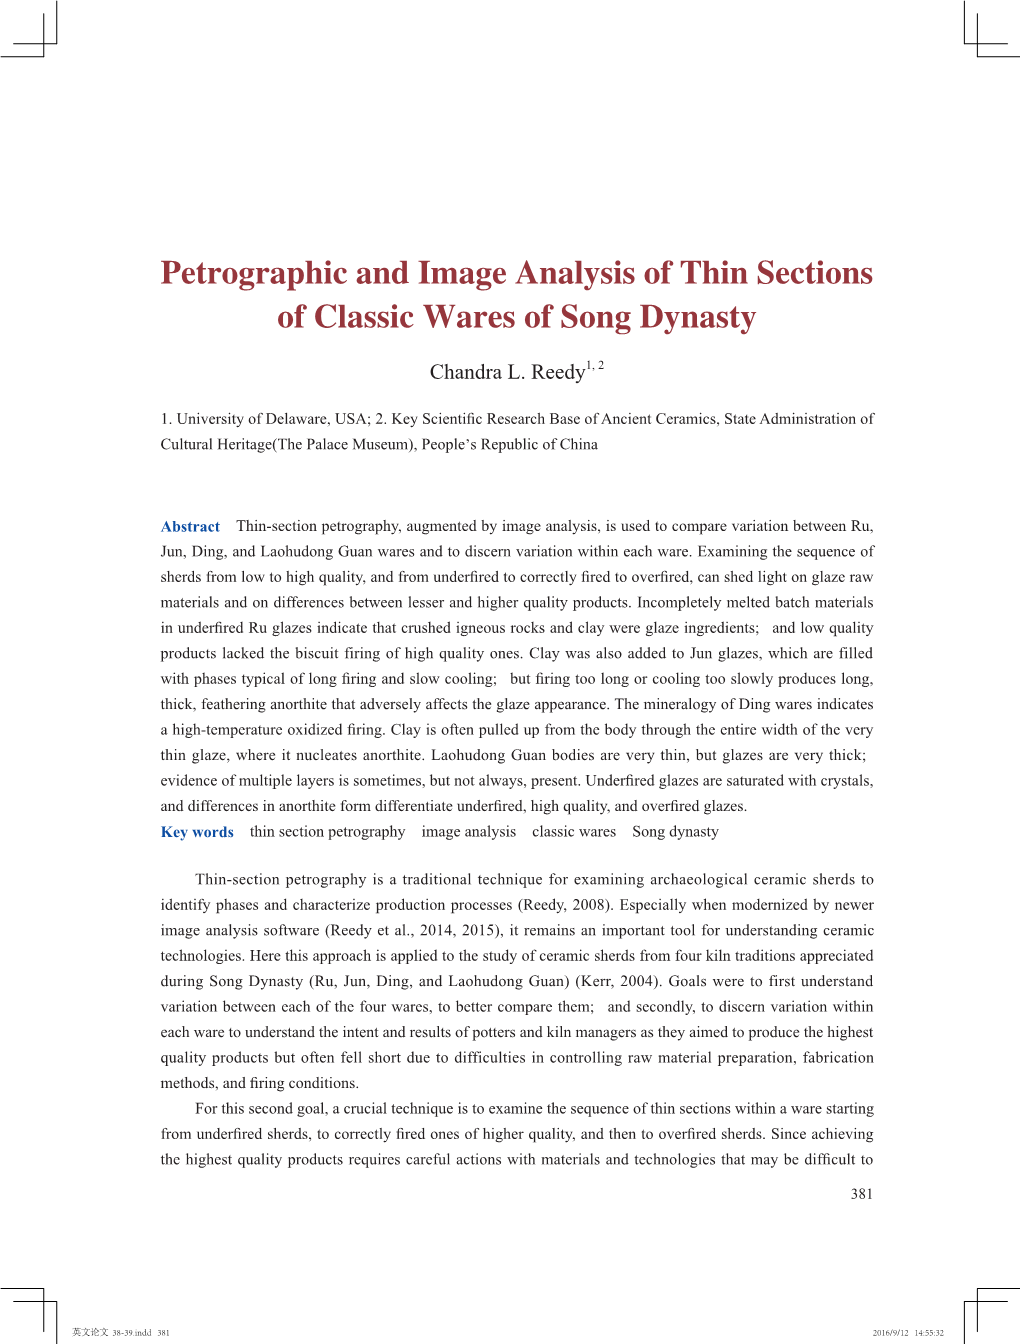 Petrographic and Image Analysis of Thin Sections of Classic Wares of Song Dynasty